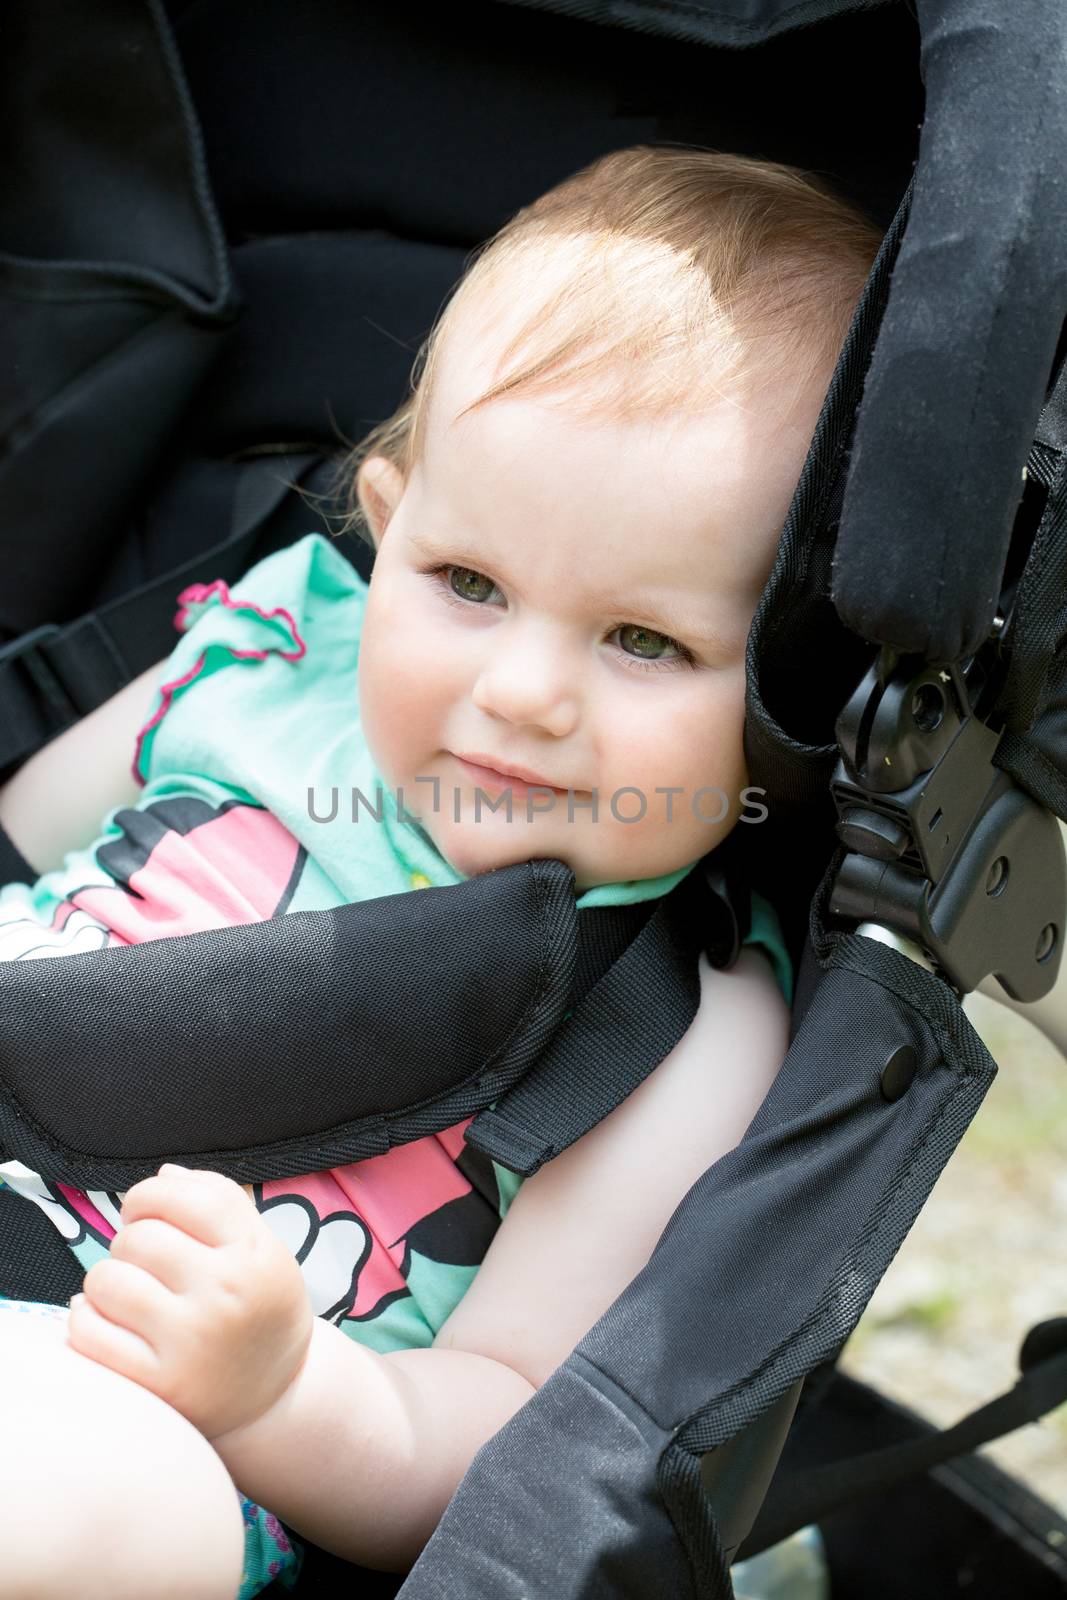 lose up Portrait of a Cute White Blond Baby girl on his Stroller, Looking Into the Distance.